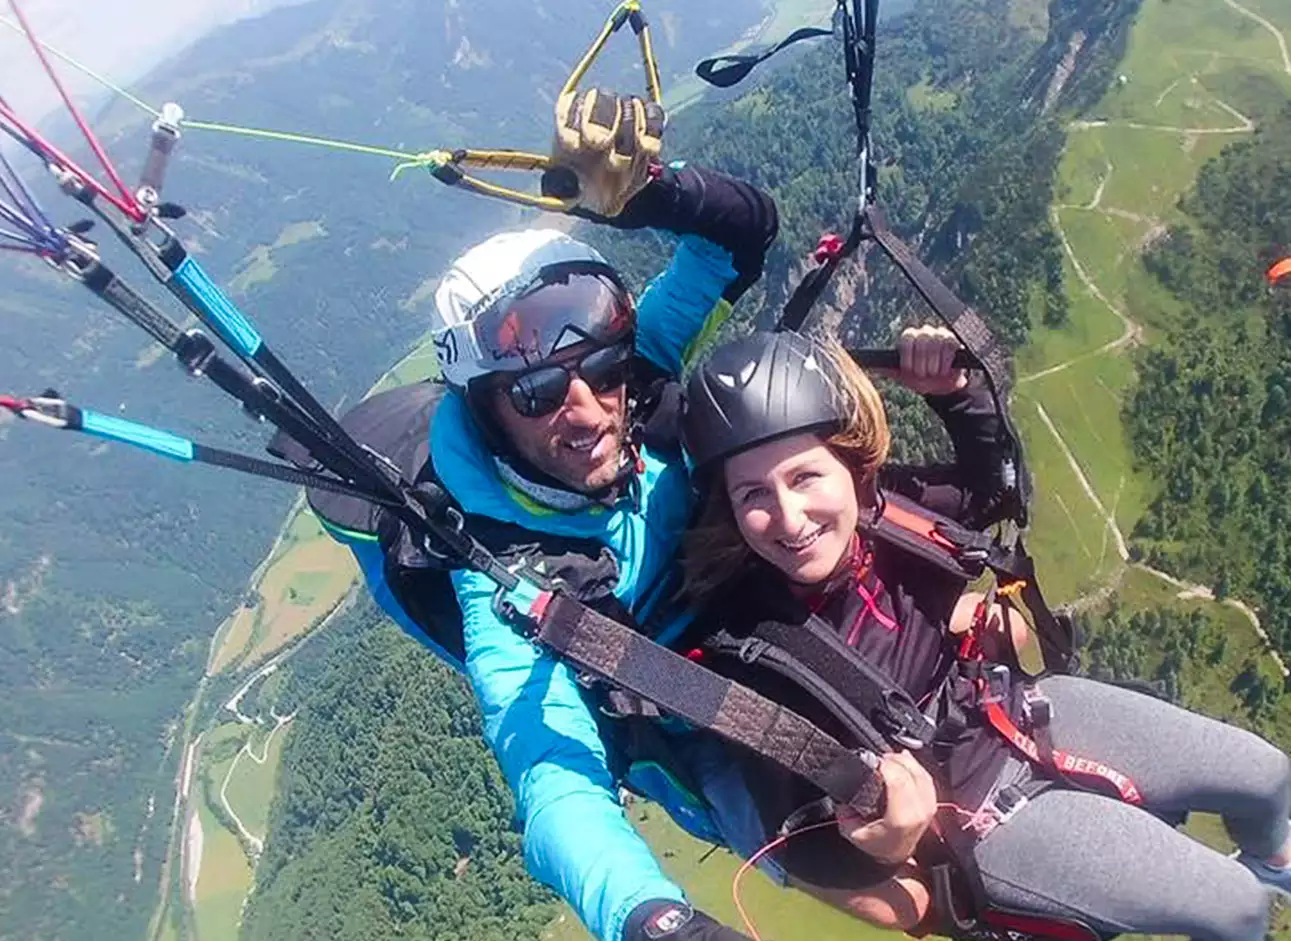 Paragliding - Soar high and experience the thrill of paragliding flights